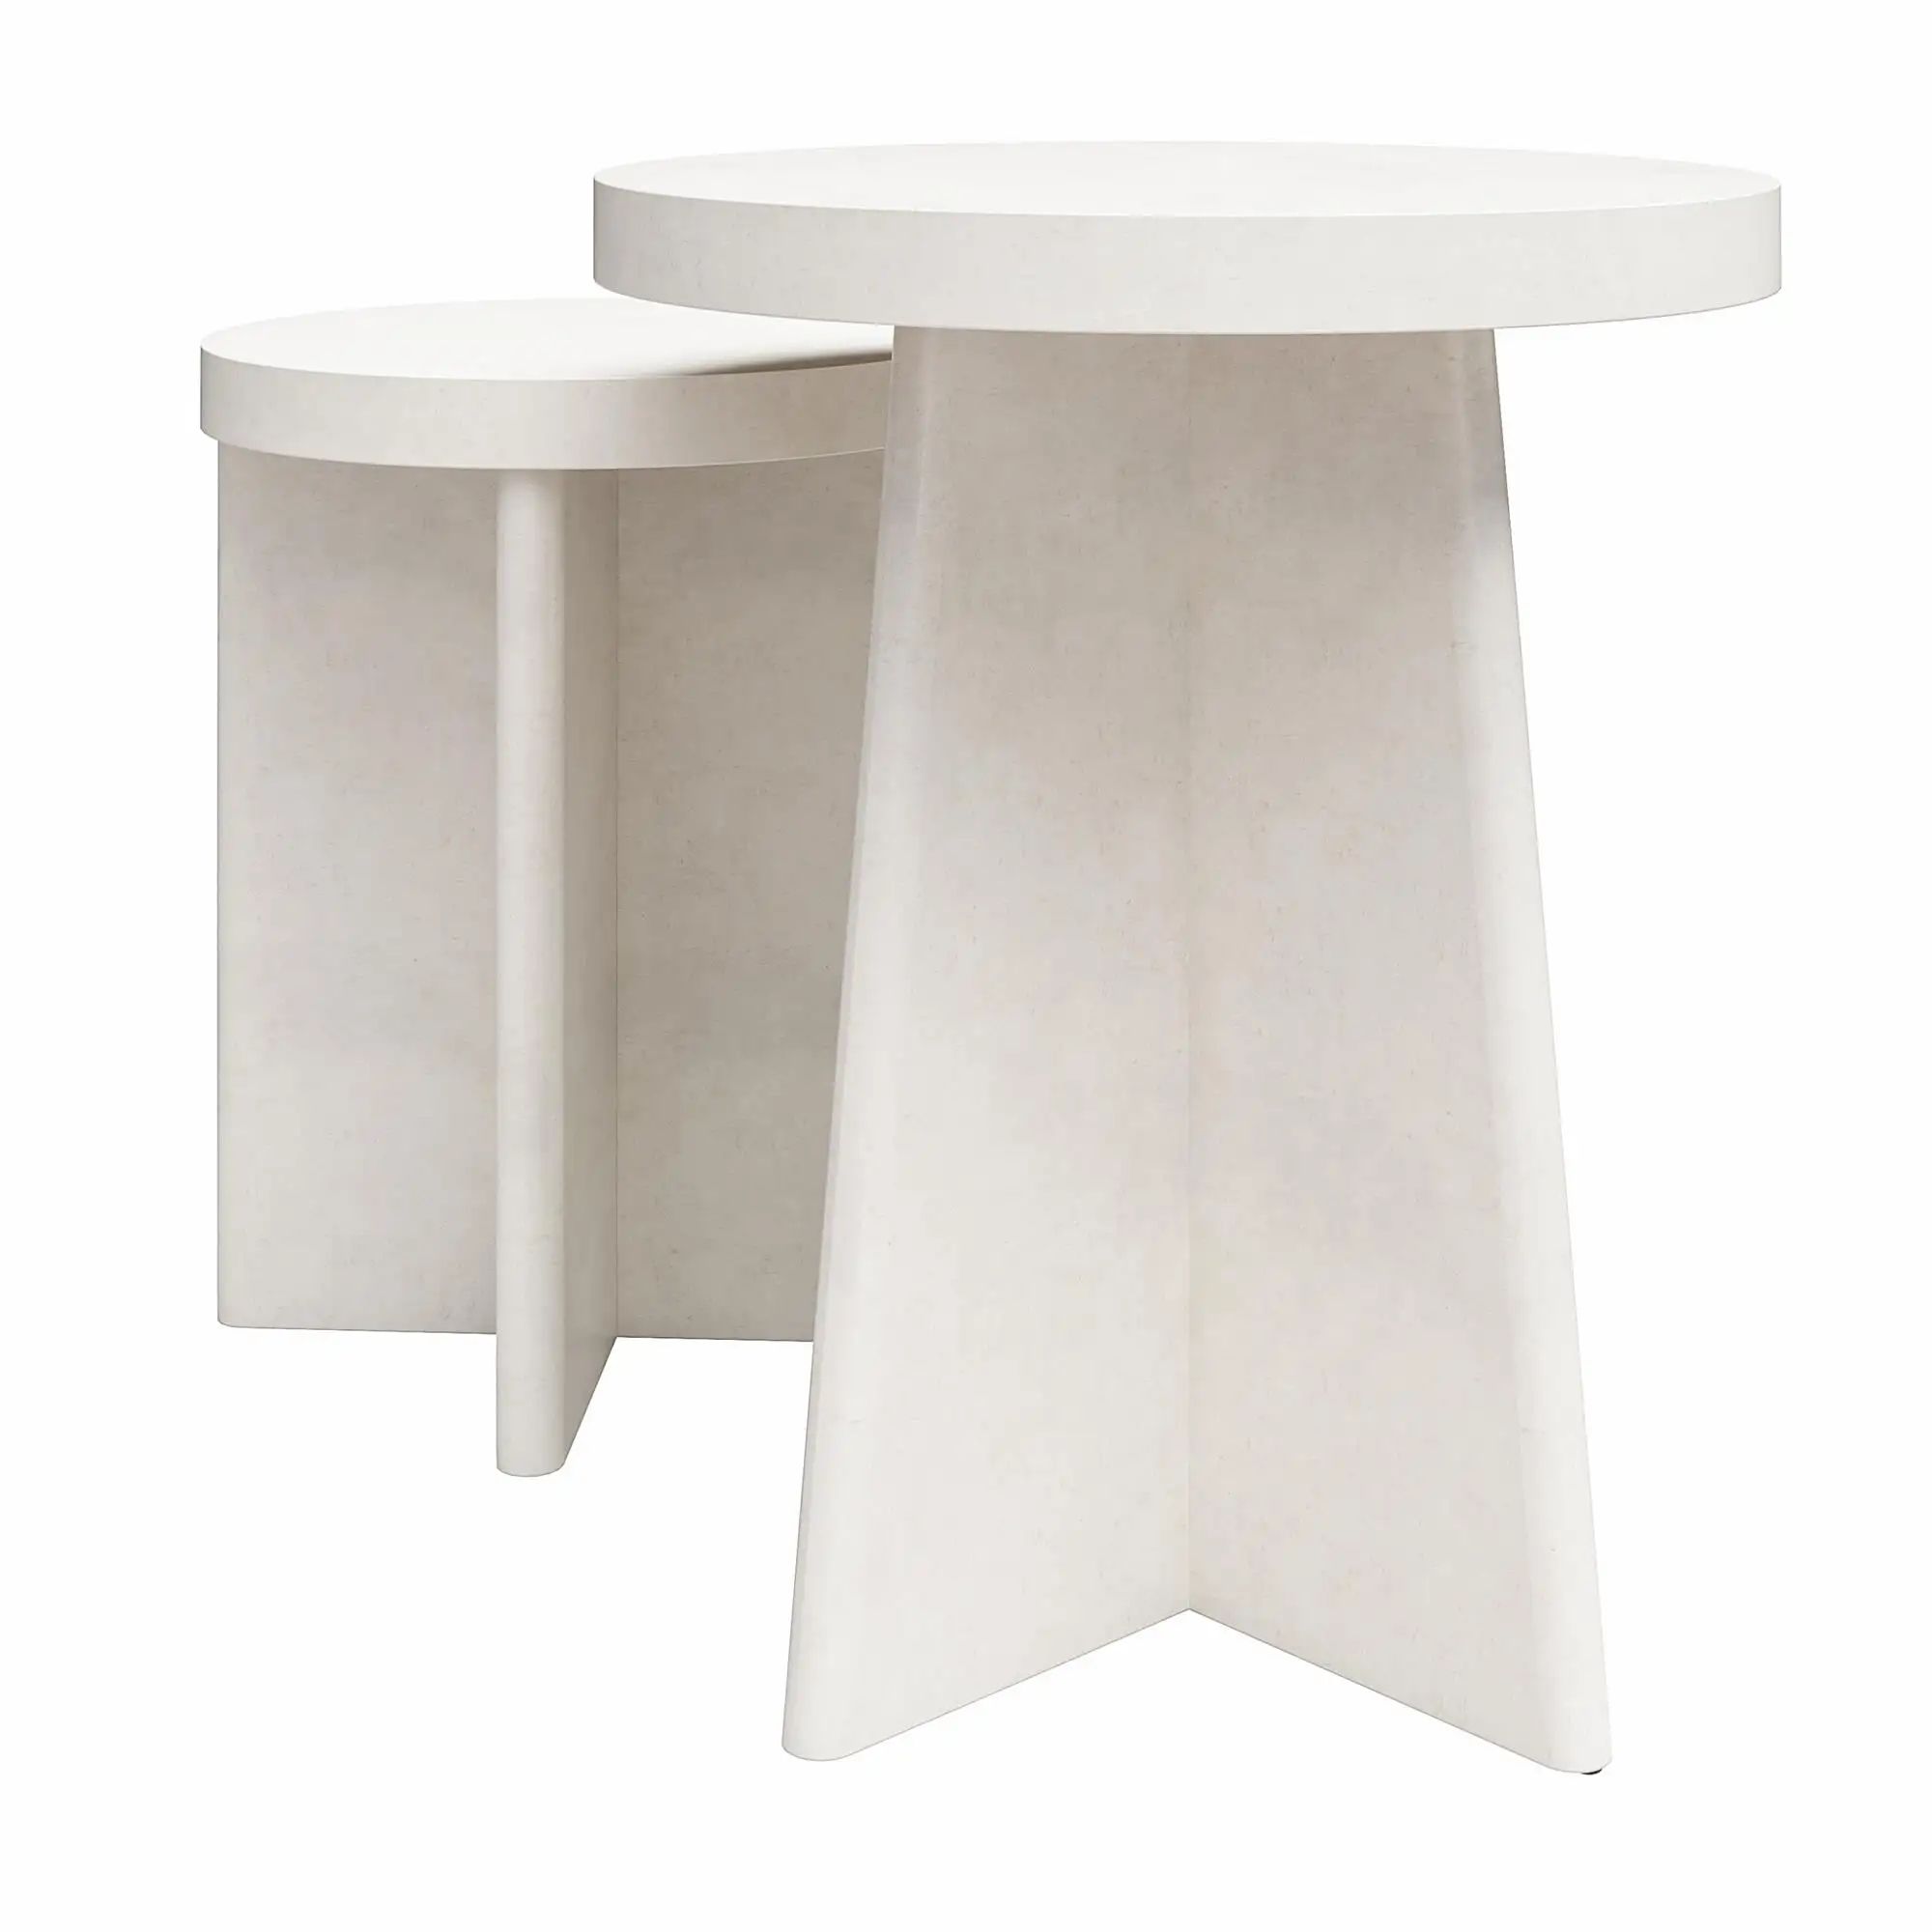 Liam Round End Tables, Set Of 2, Plaster Intended For Liam Round Plaster Coffee Tables (View 9 of 15)